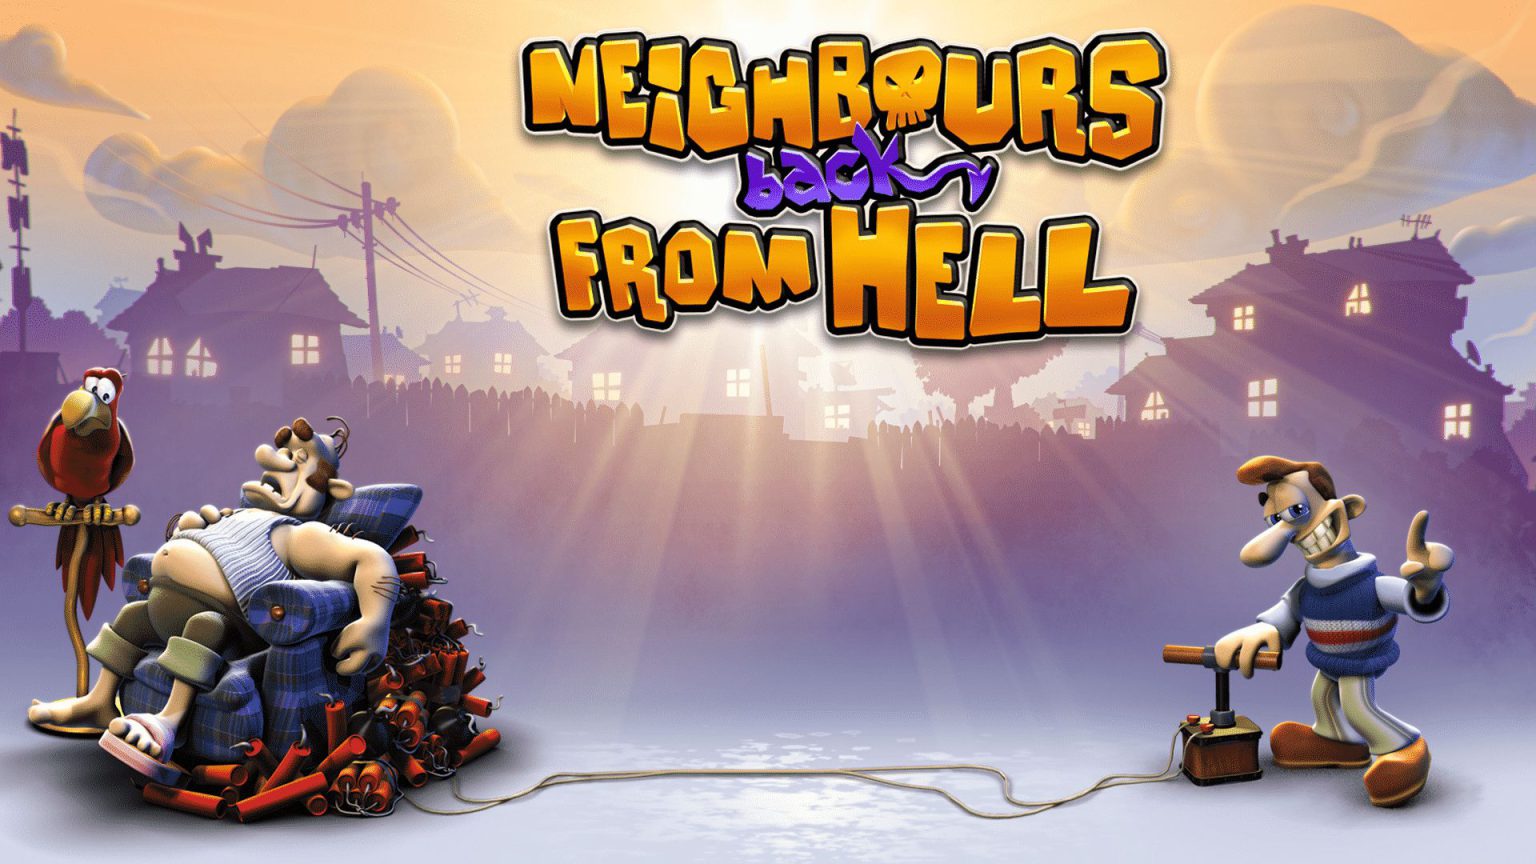 neighbours back from hell - generacion xbox